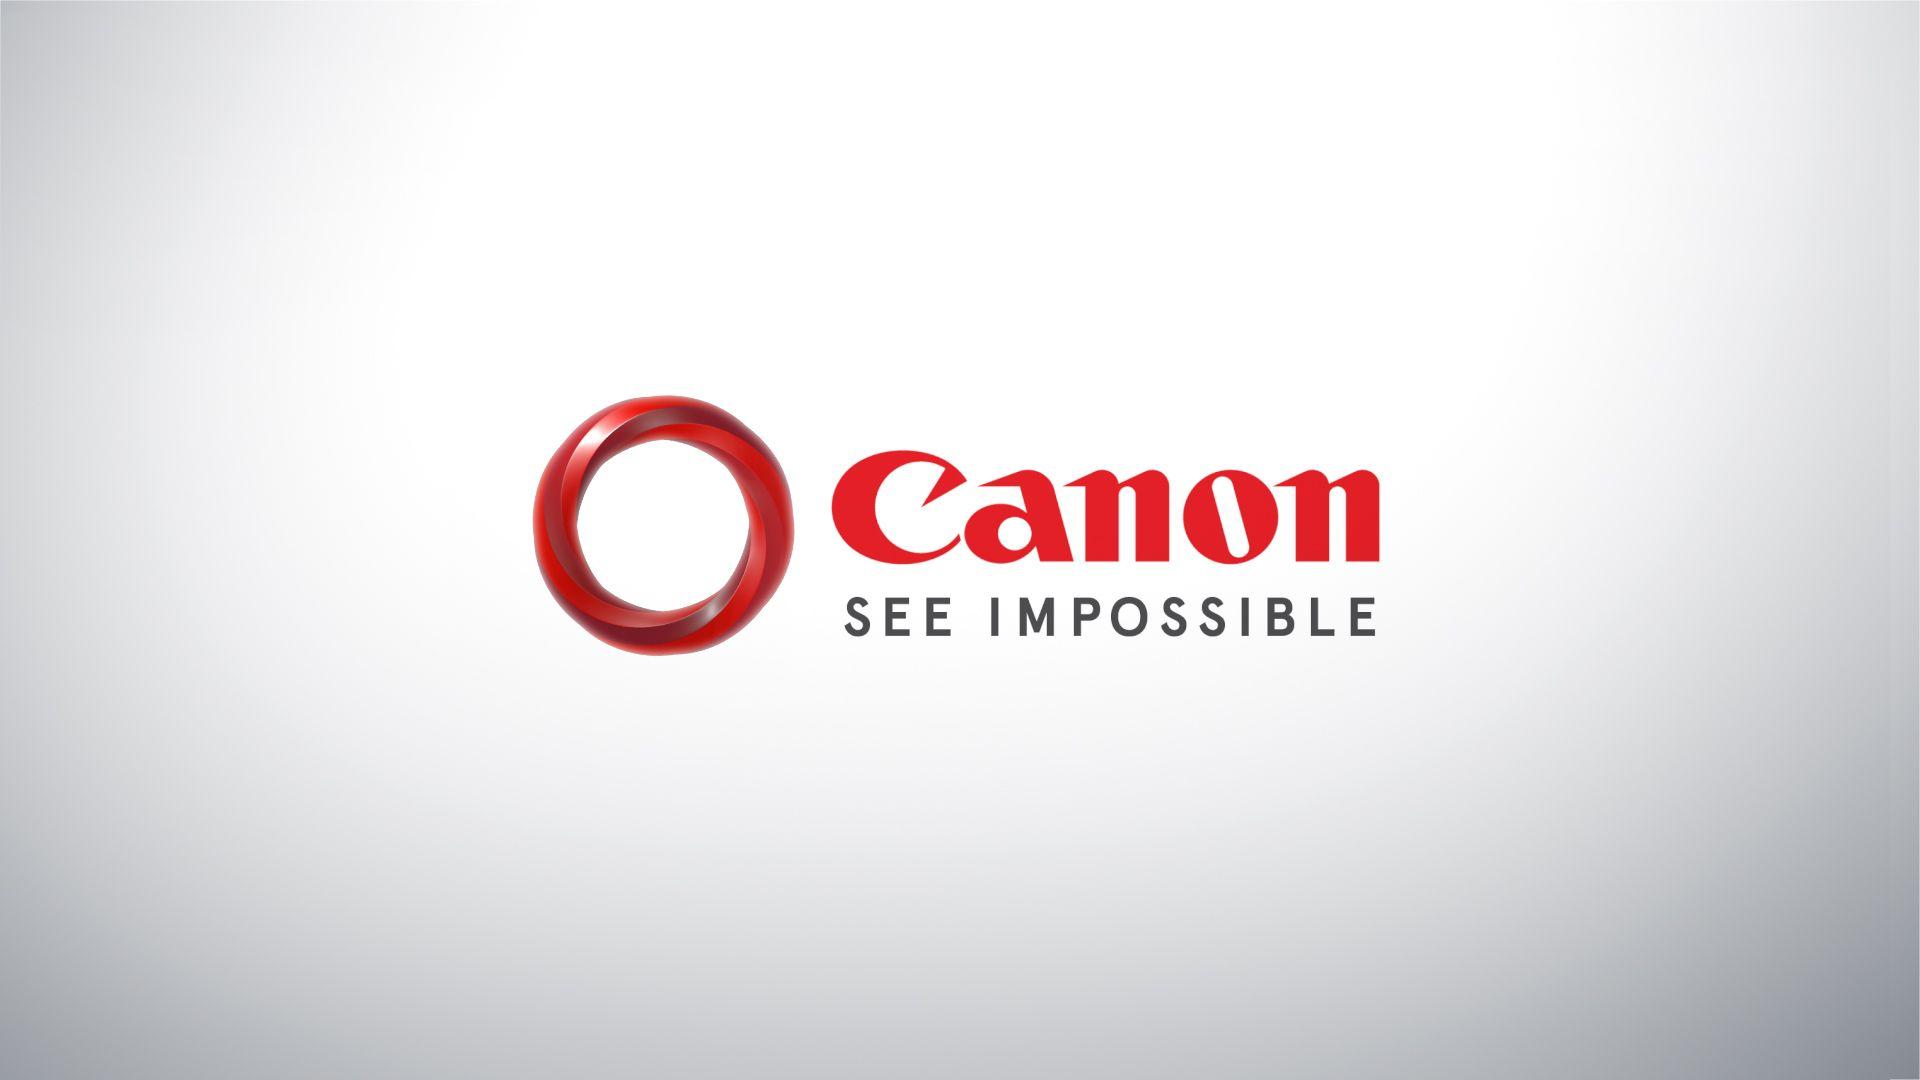 Canon See Impossible Logo - Canon HD Wallpapers